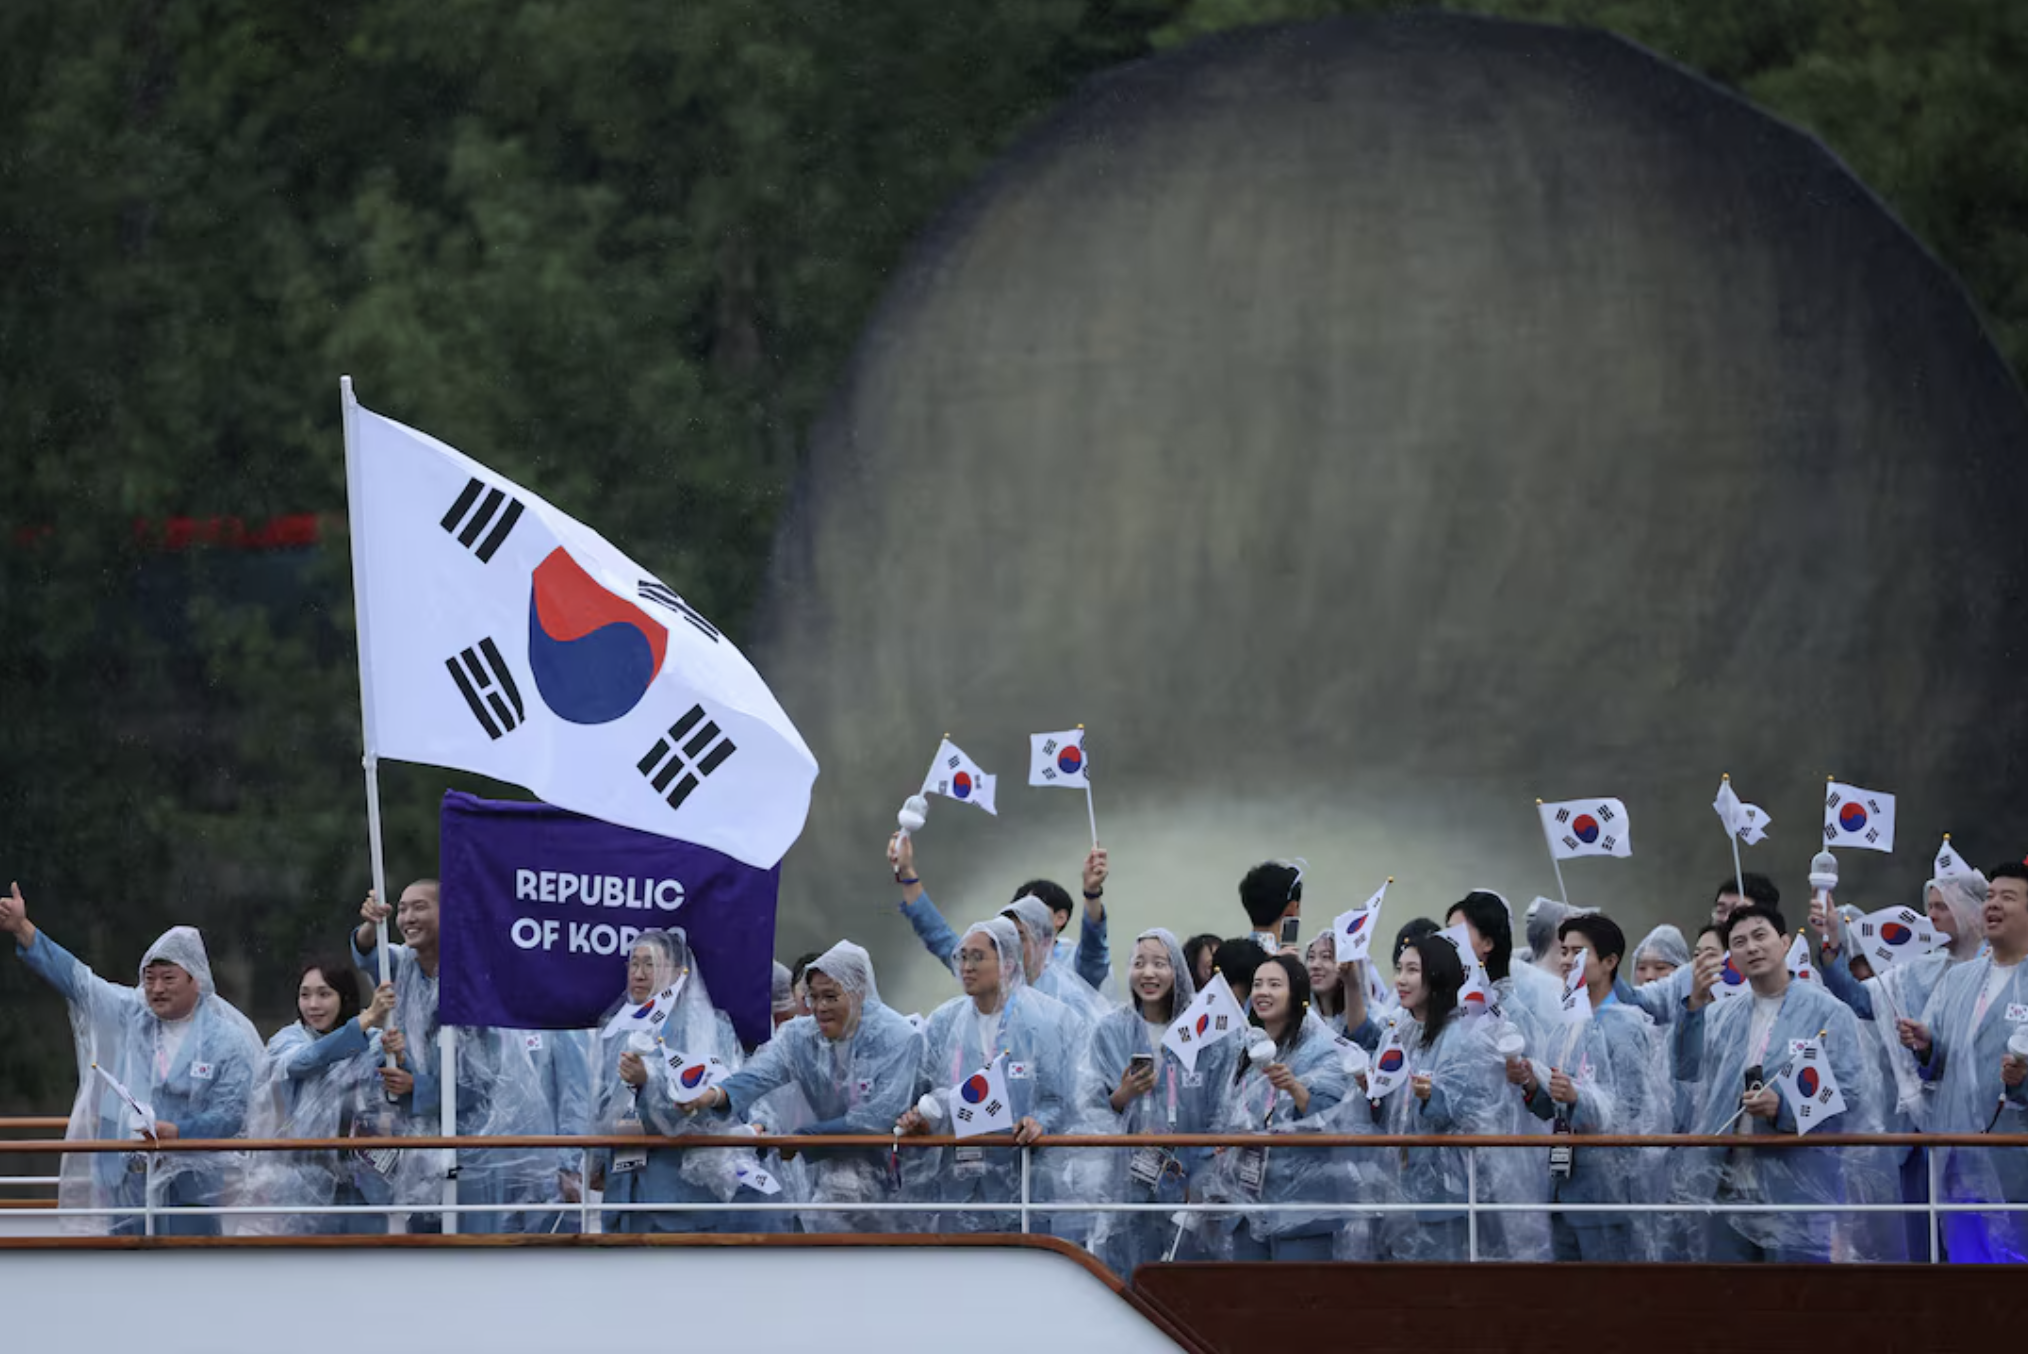 South Korean Athletes Introduced As North Koreans At Olympics Opening Ceremony 55406